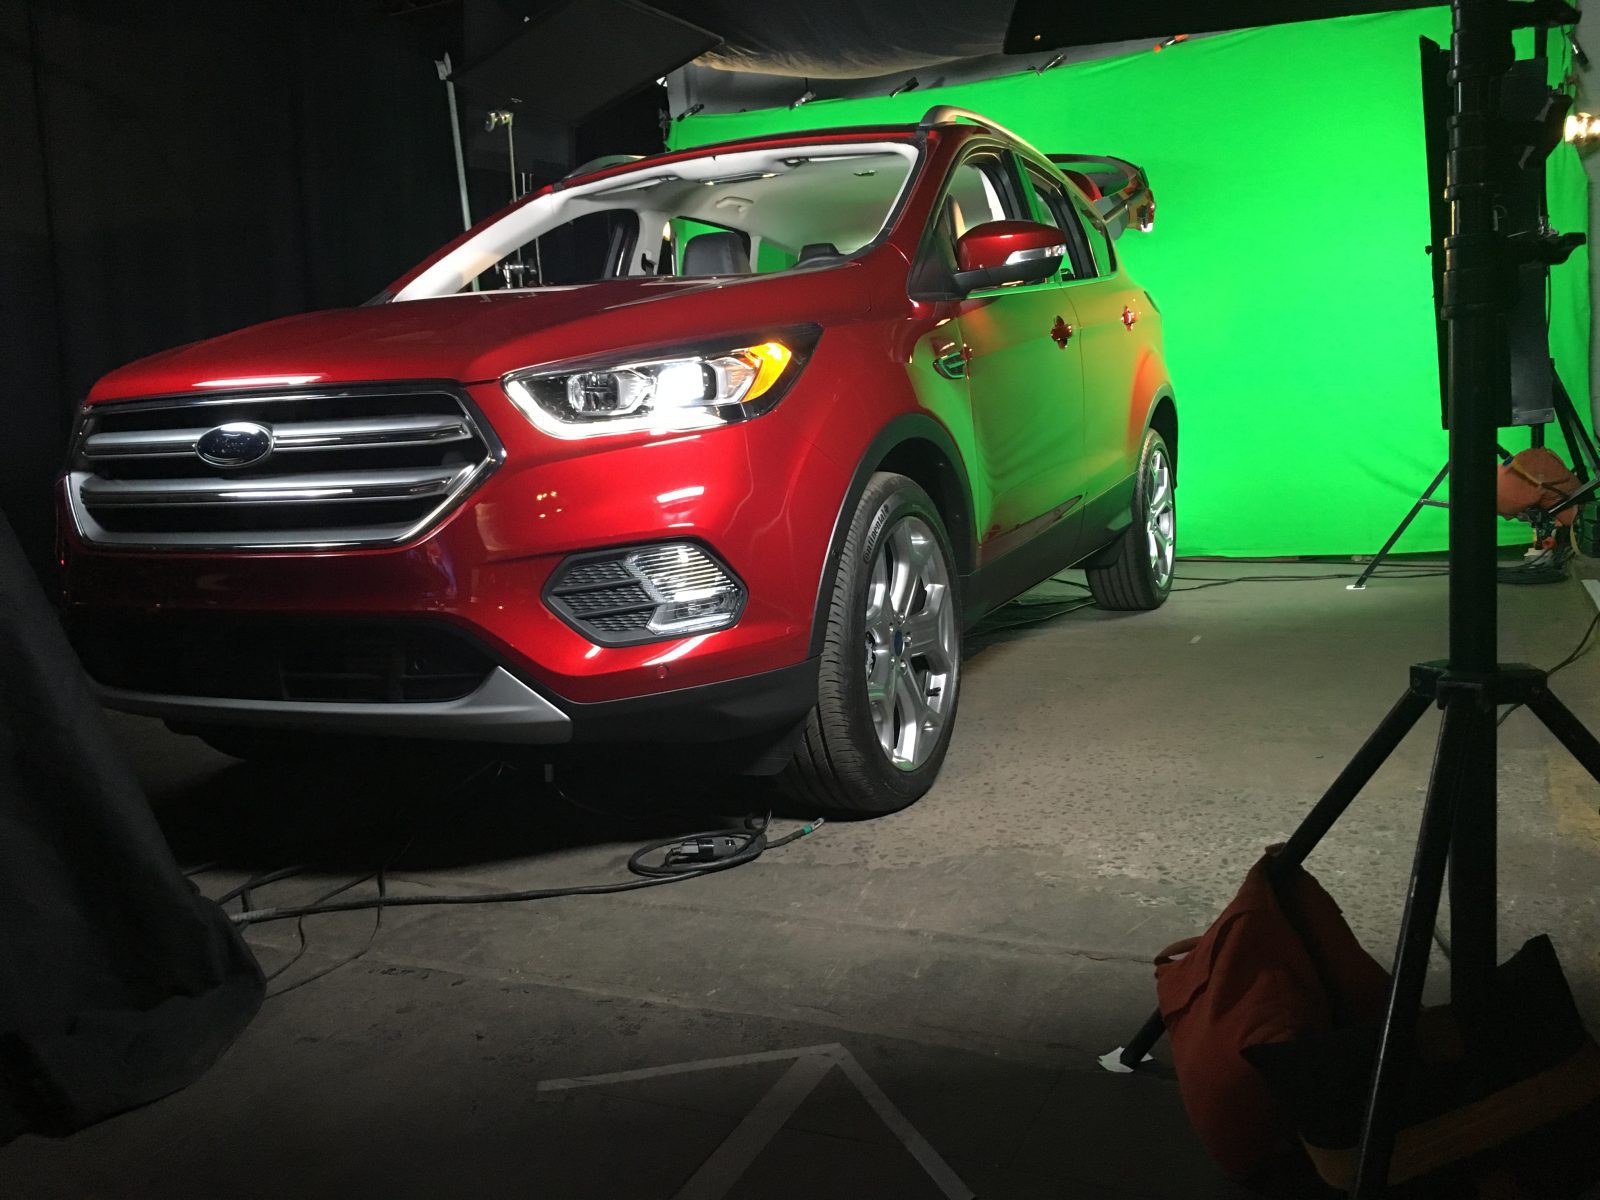 Ford’s Escape New York Experience Made Me Change The Way I View NYC